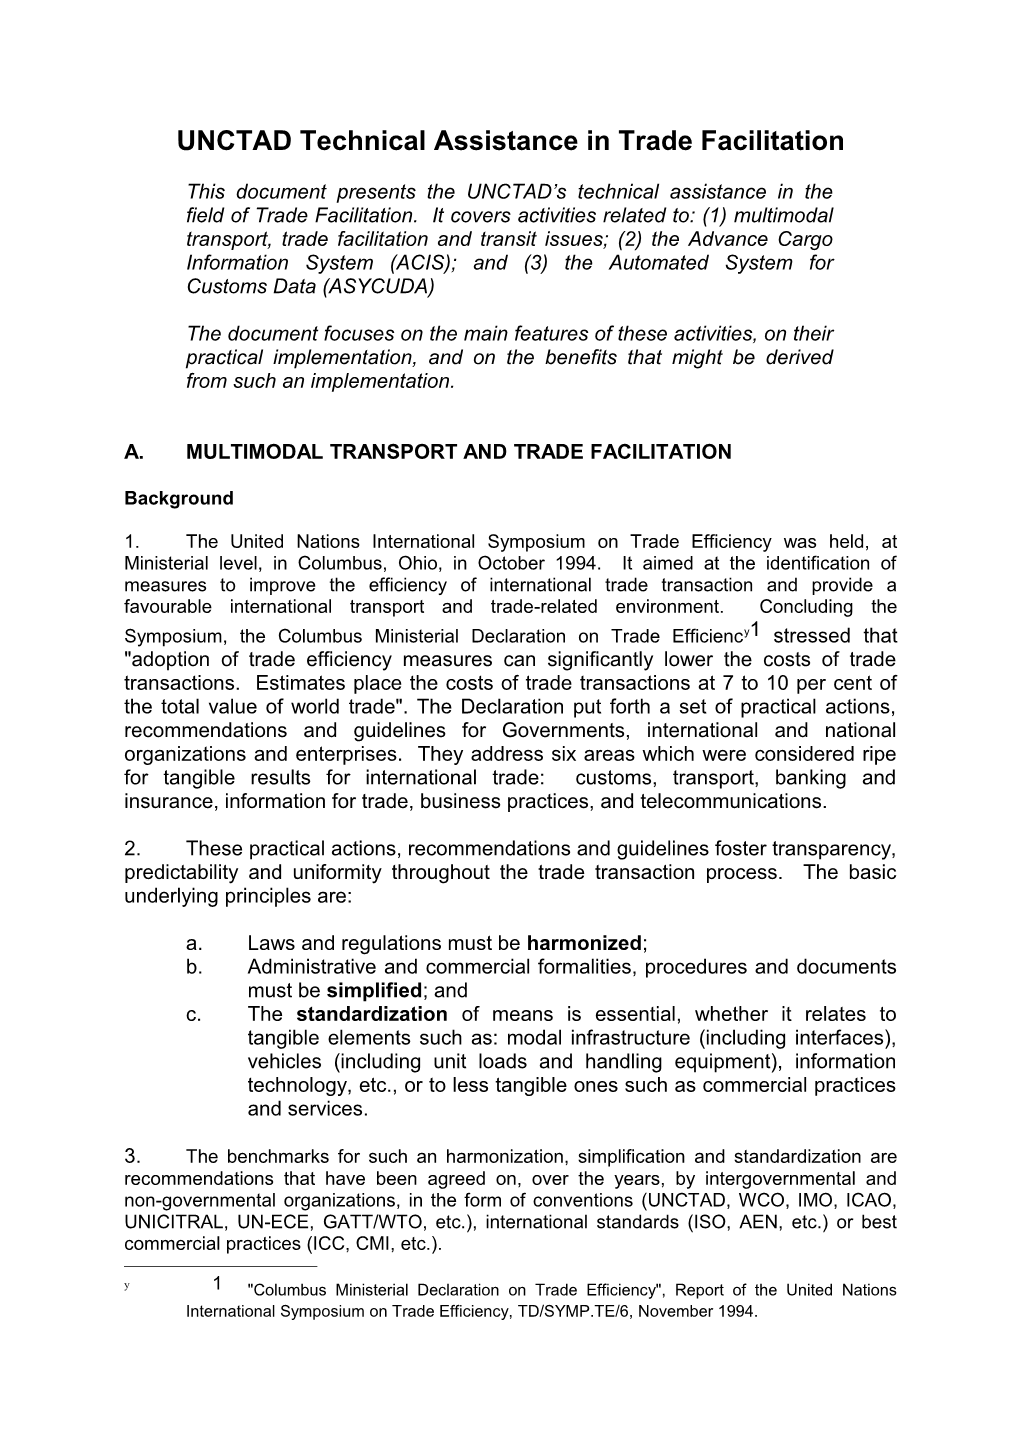 UNCTAD Technical Assistance in Trade Facilitation